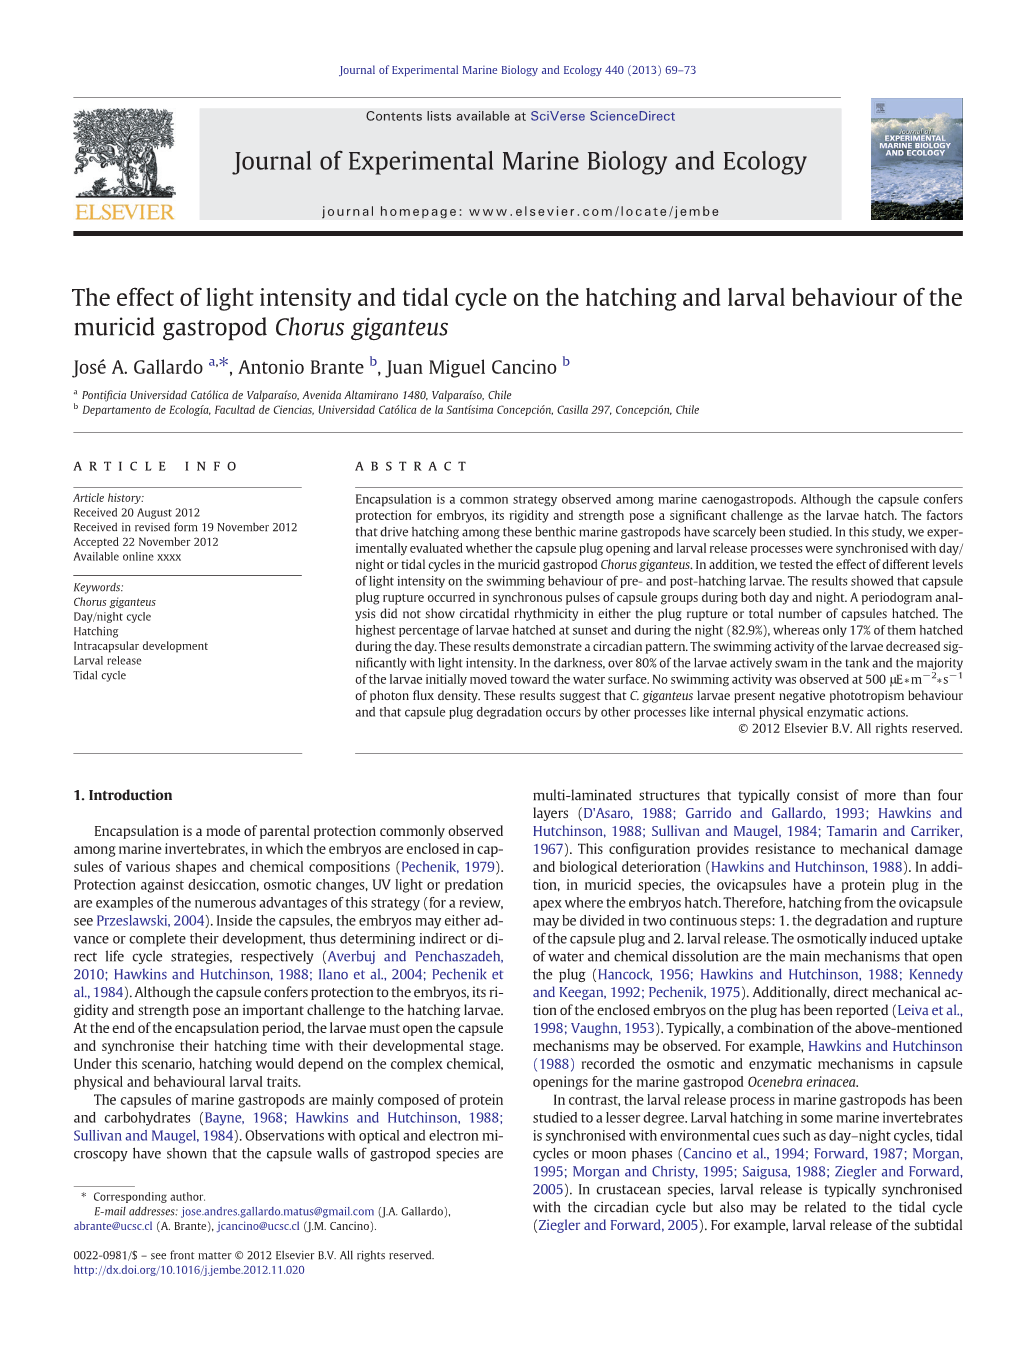 The Effect of Light Intensity and Tidal Cycle on the Hatching and Larval Behaviour of the Muricid Gastropod Chorus Giganteus